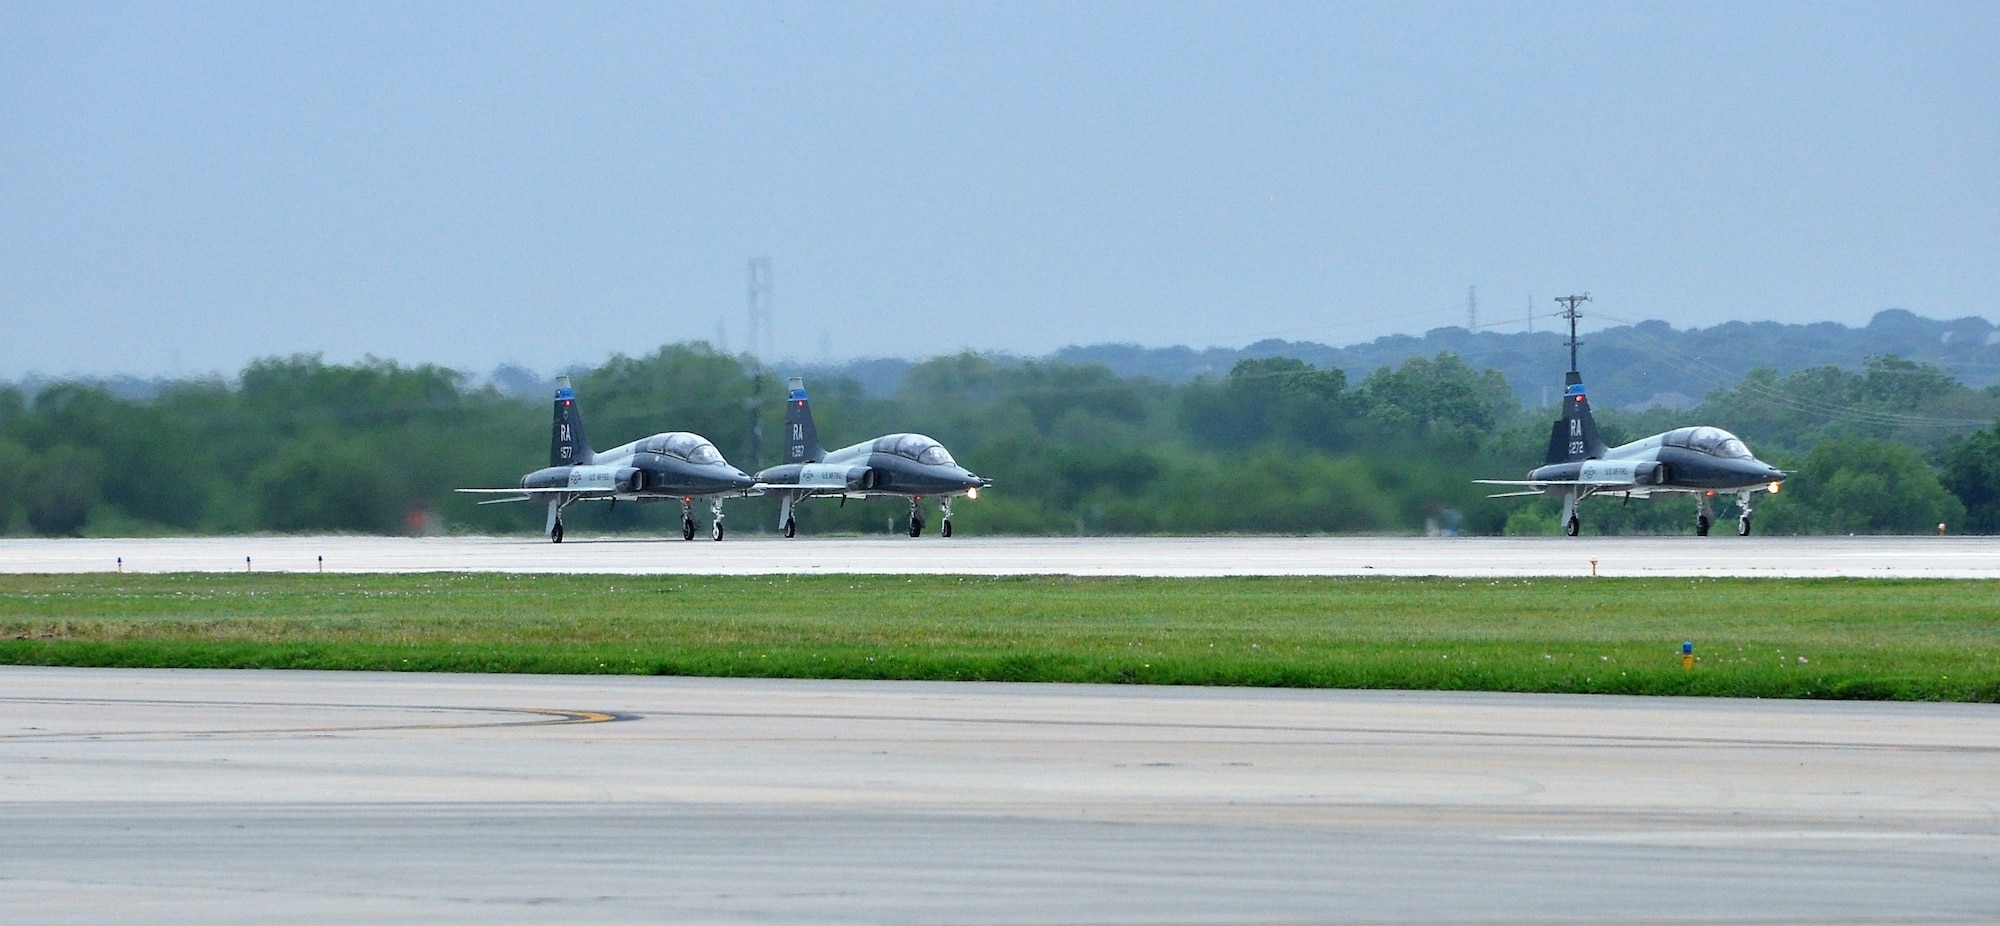 Three T-38s perform individual 10-second takeoffs during the 2018 Cobras in the Sky exercise at JBSA-Randolph. (U.S. Air Force photo by Janis El Shabazz)